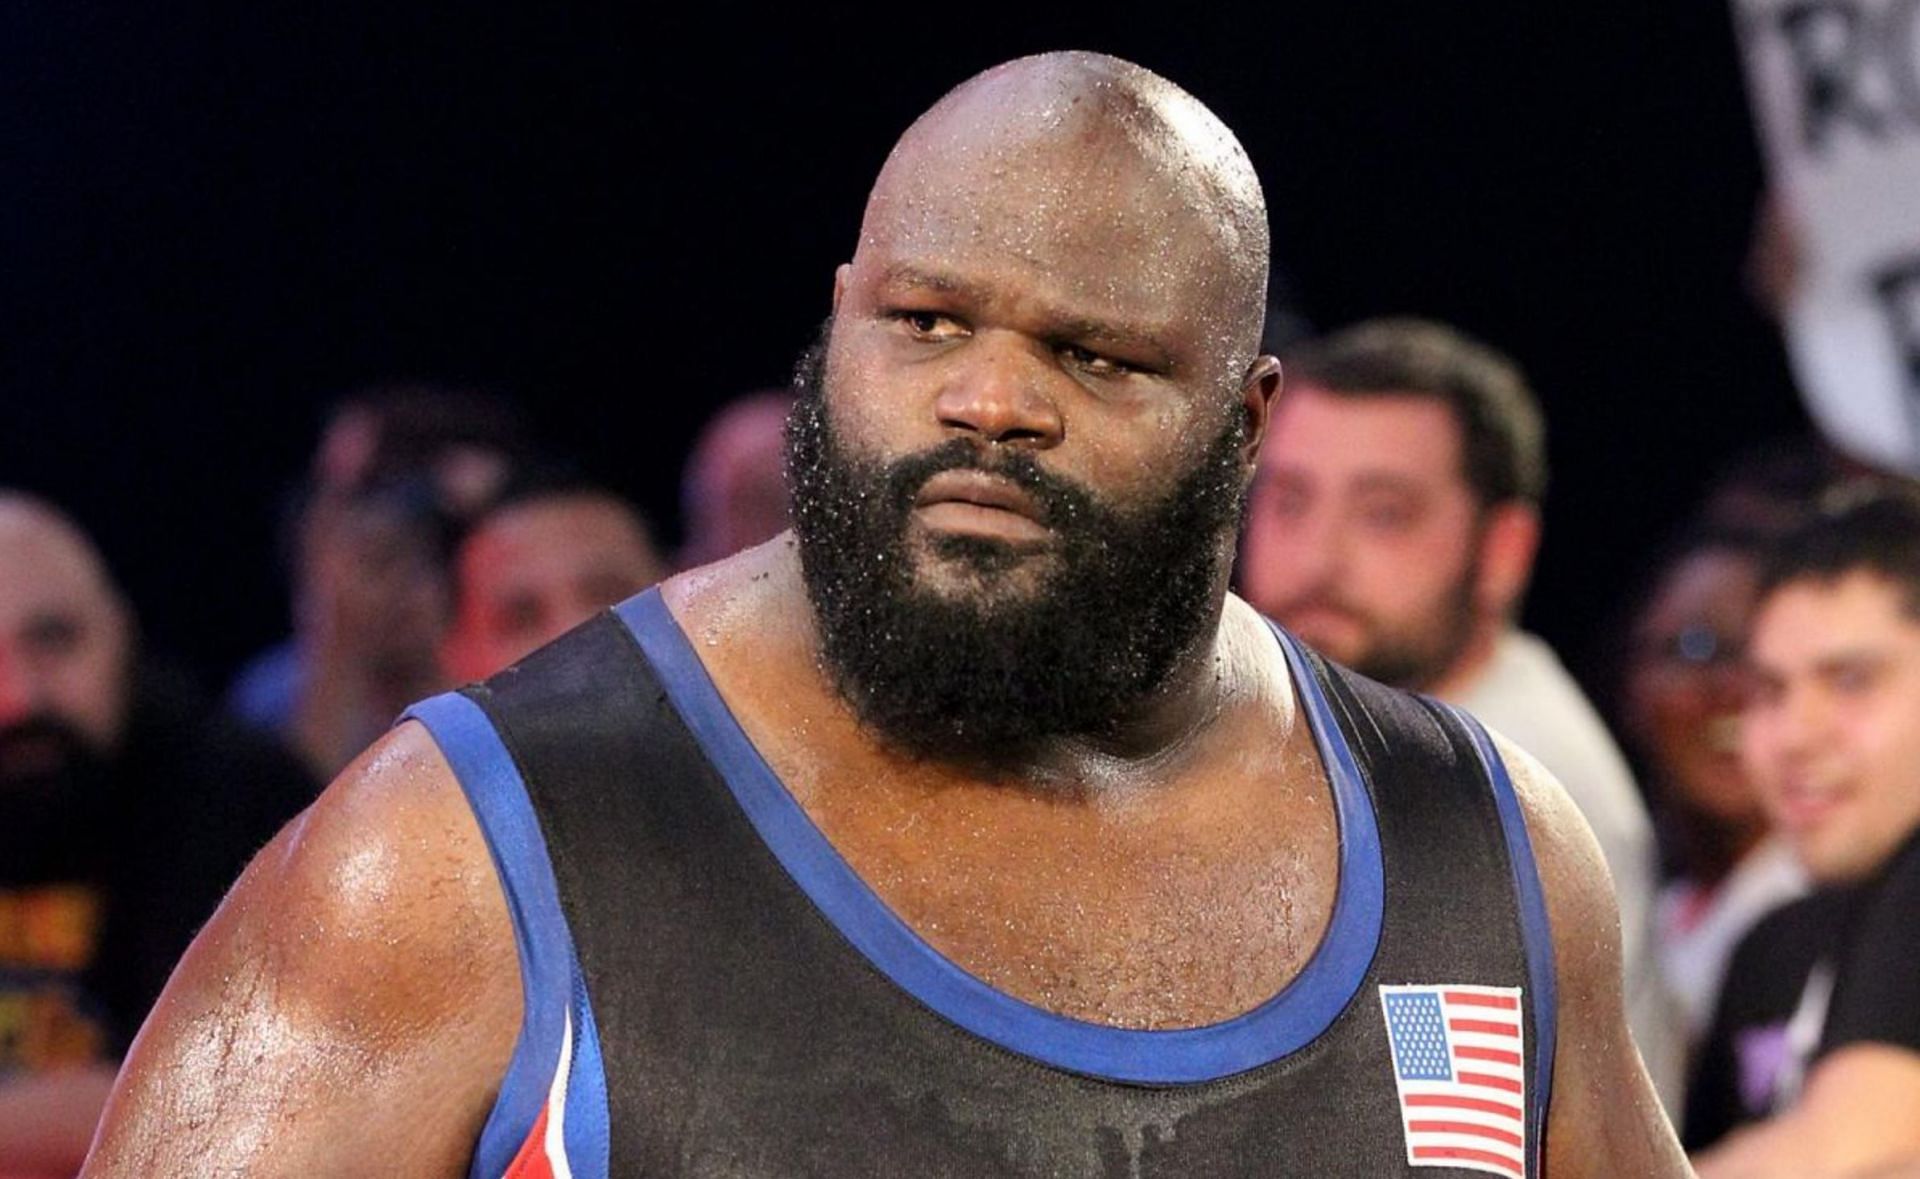 Mark Henry is a WWE Hall of Famer